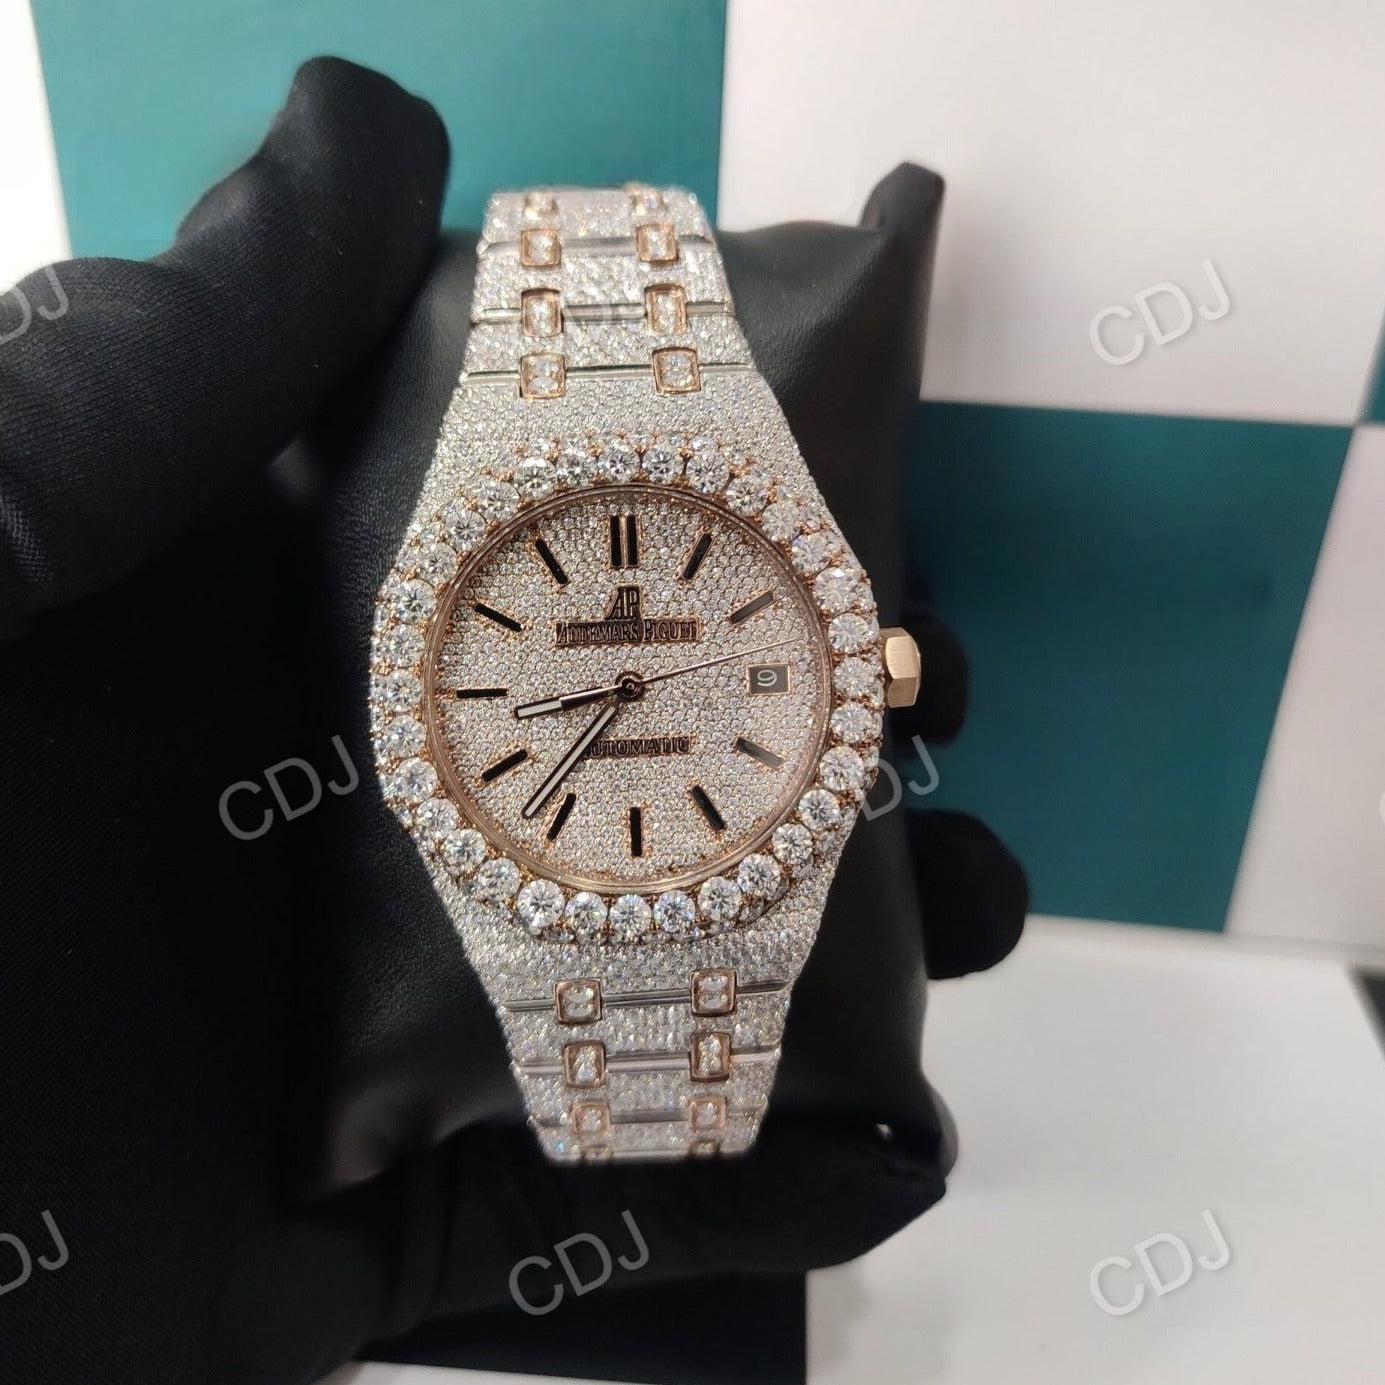 Luxury Fully Diamond Watches For Men Colorless Moissanite Bling Watch High Quality Timeless Piece